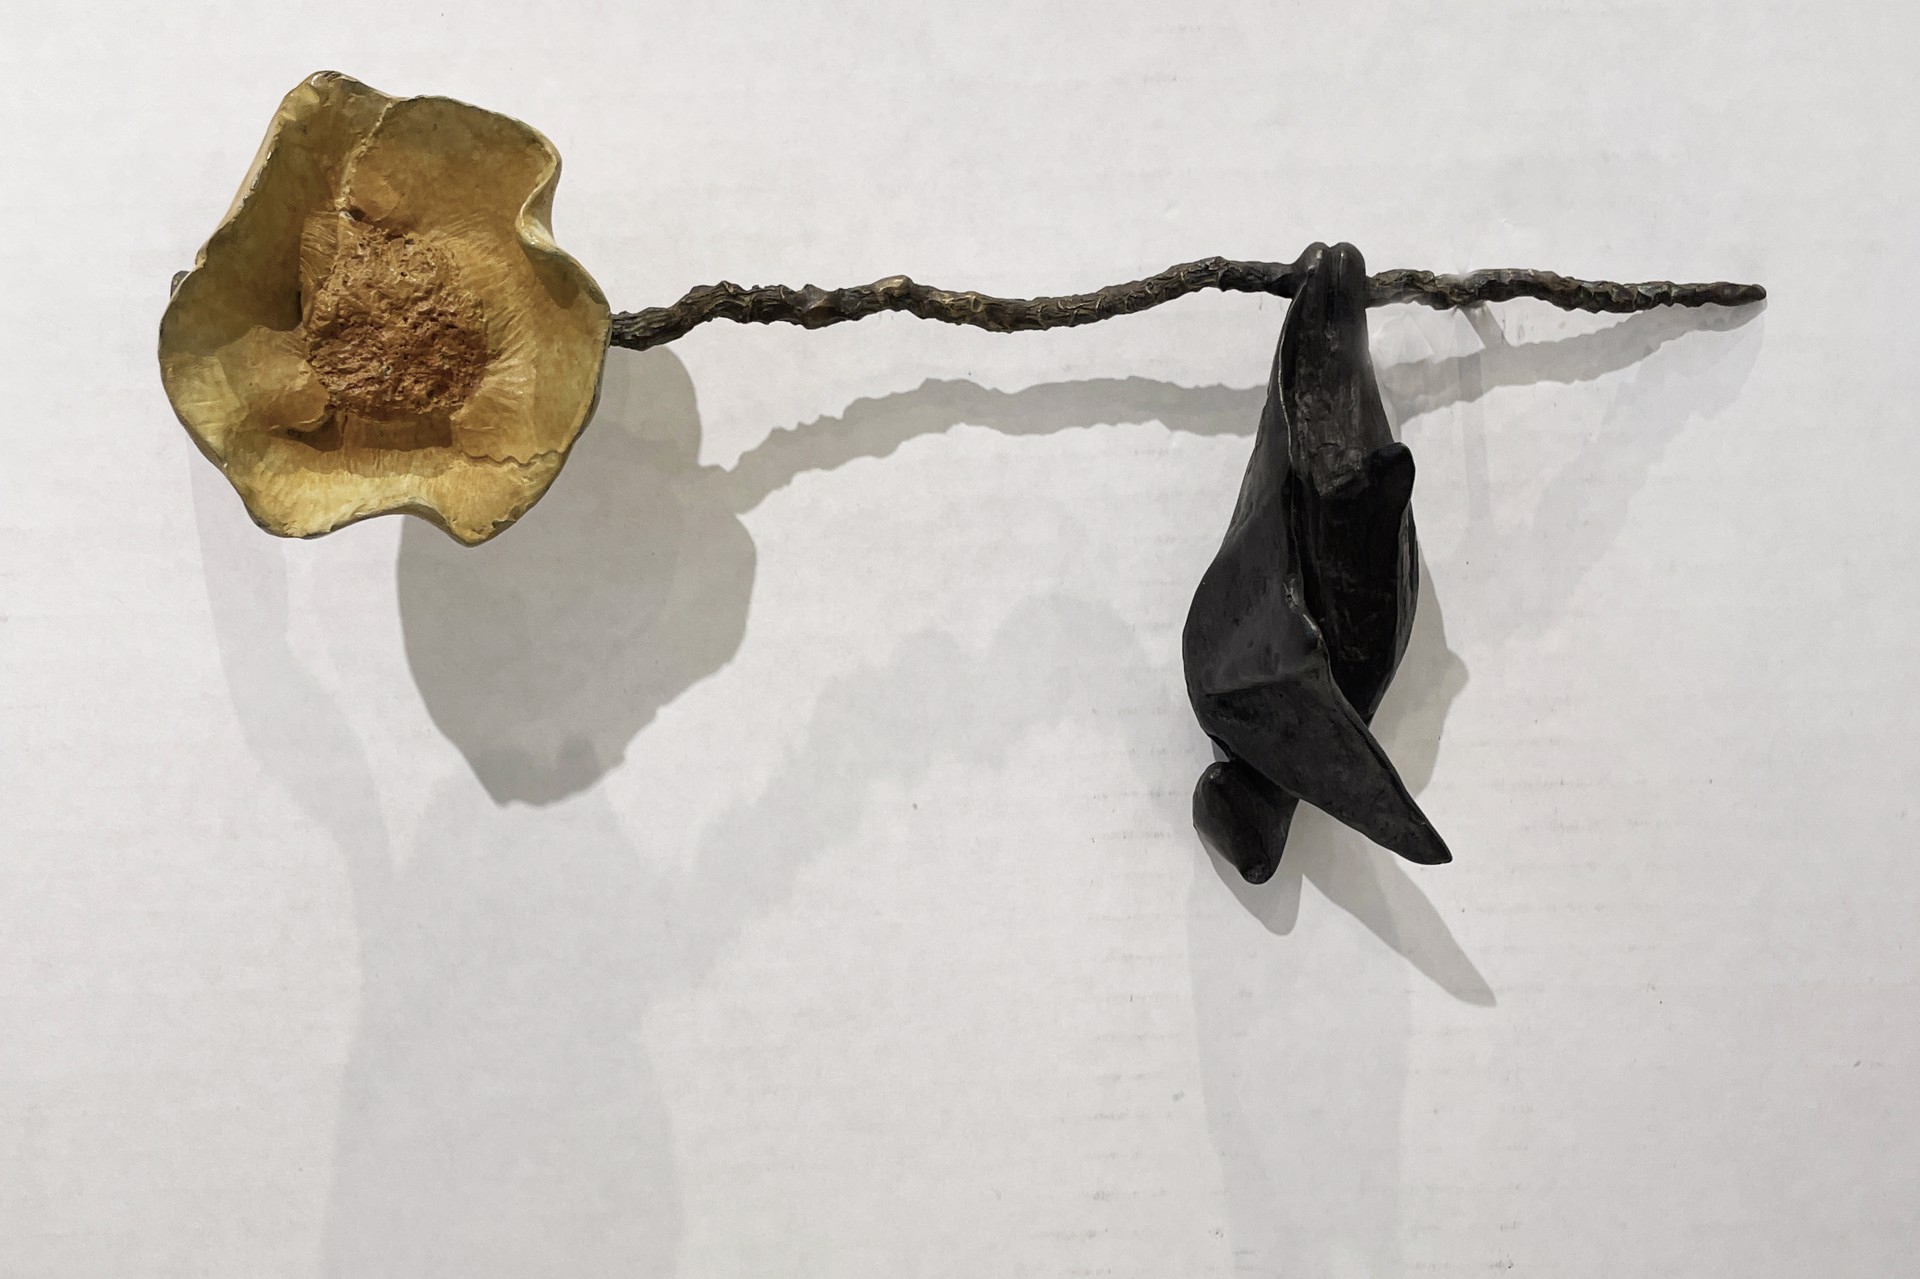 Temple Bat on a Coconut Branch, tucked wing by Copper Tritscheller